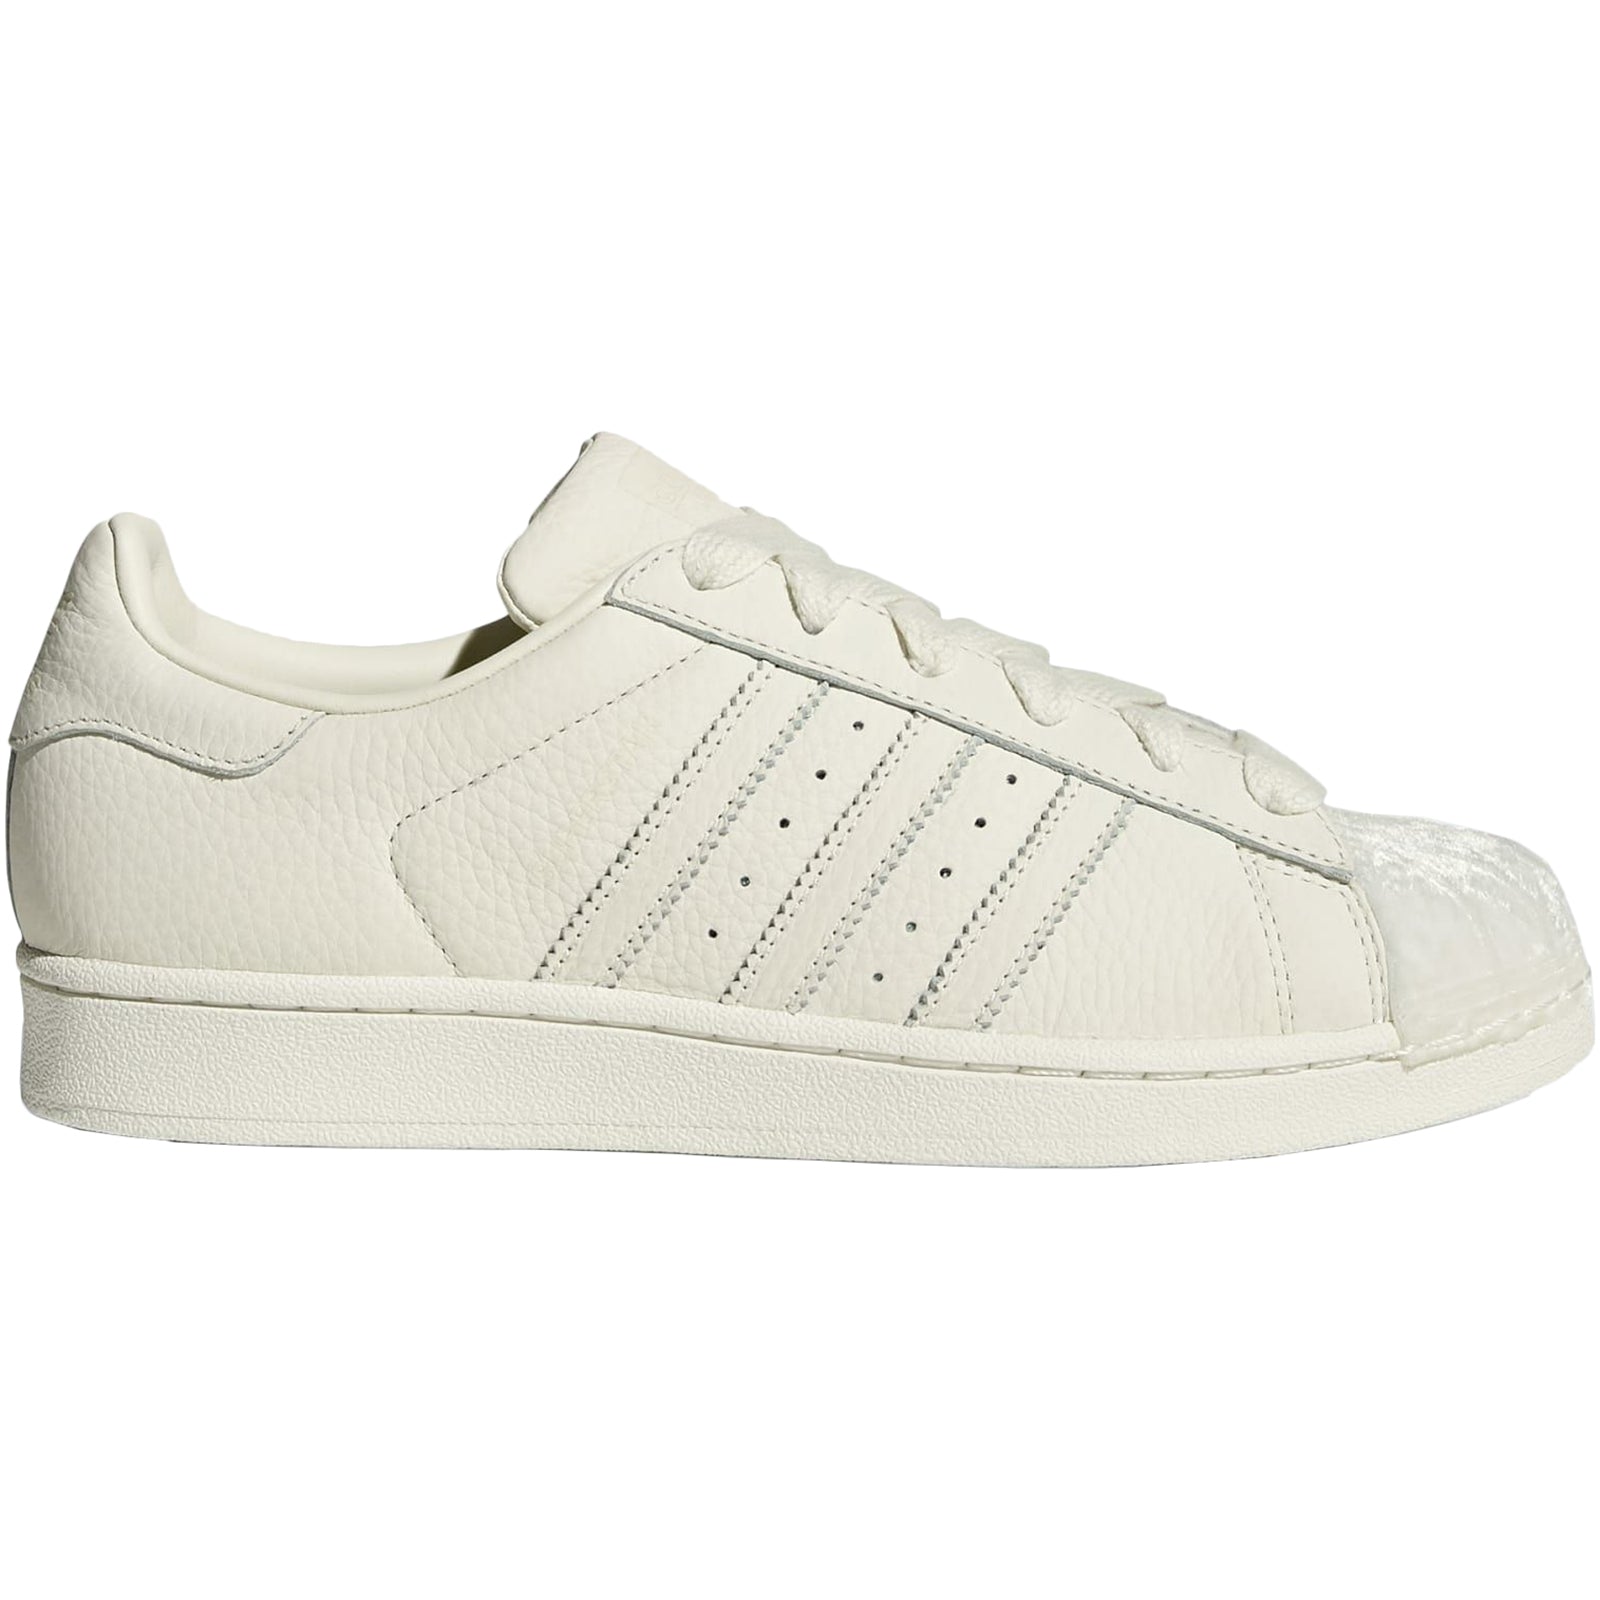 Adidas Womens Trainers Superstar Classic Sneakers - UK 4.5